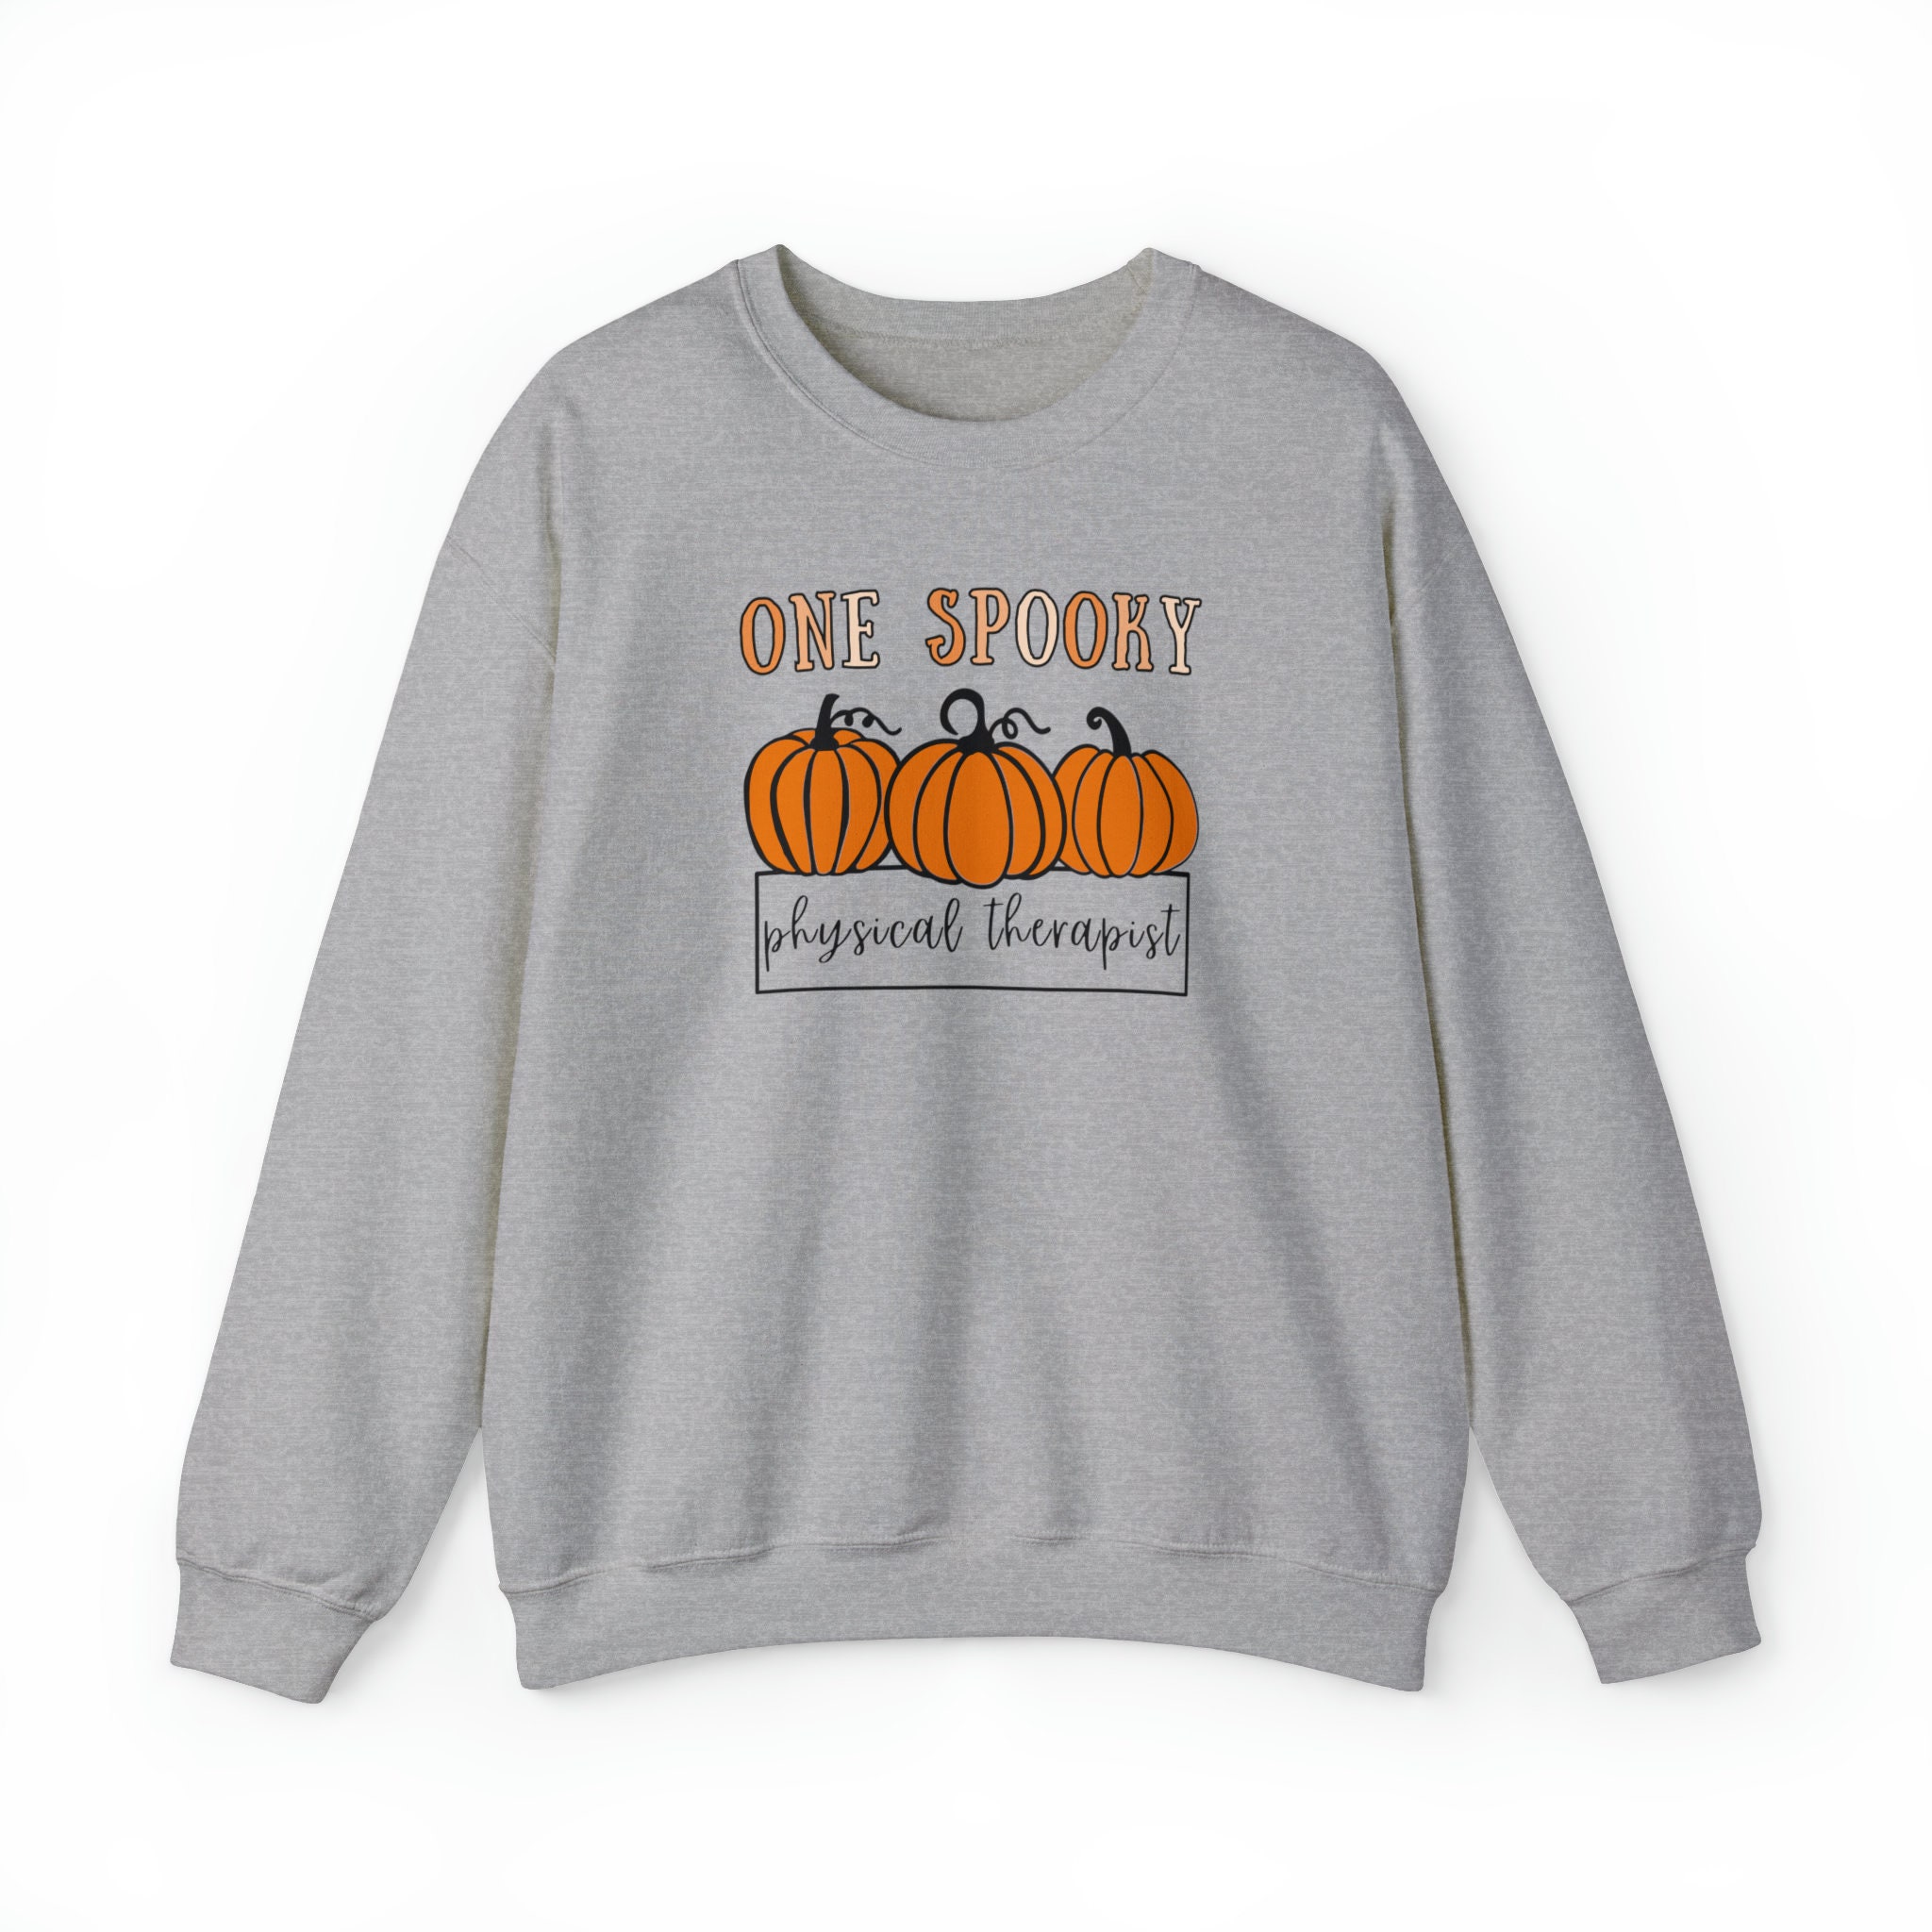 Discover One Spooky Physical Therapist Sweatshirt, PT Shirt, Physical Therapy, Pediatric PT, Physical Therapy PT, pt Sweatshirt, Halloween Crewneck